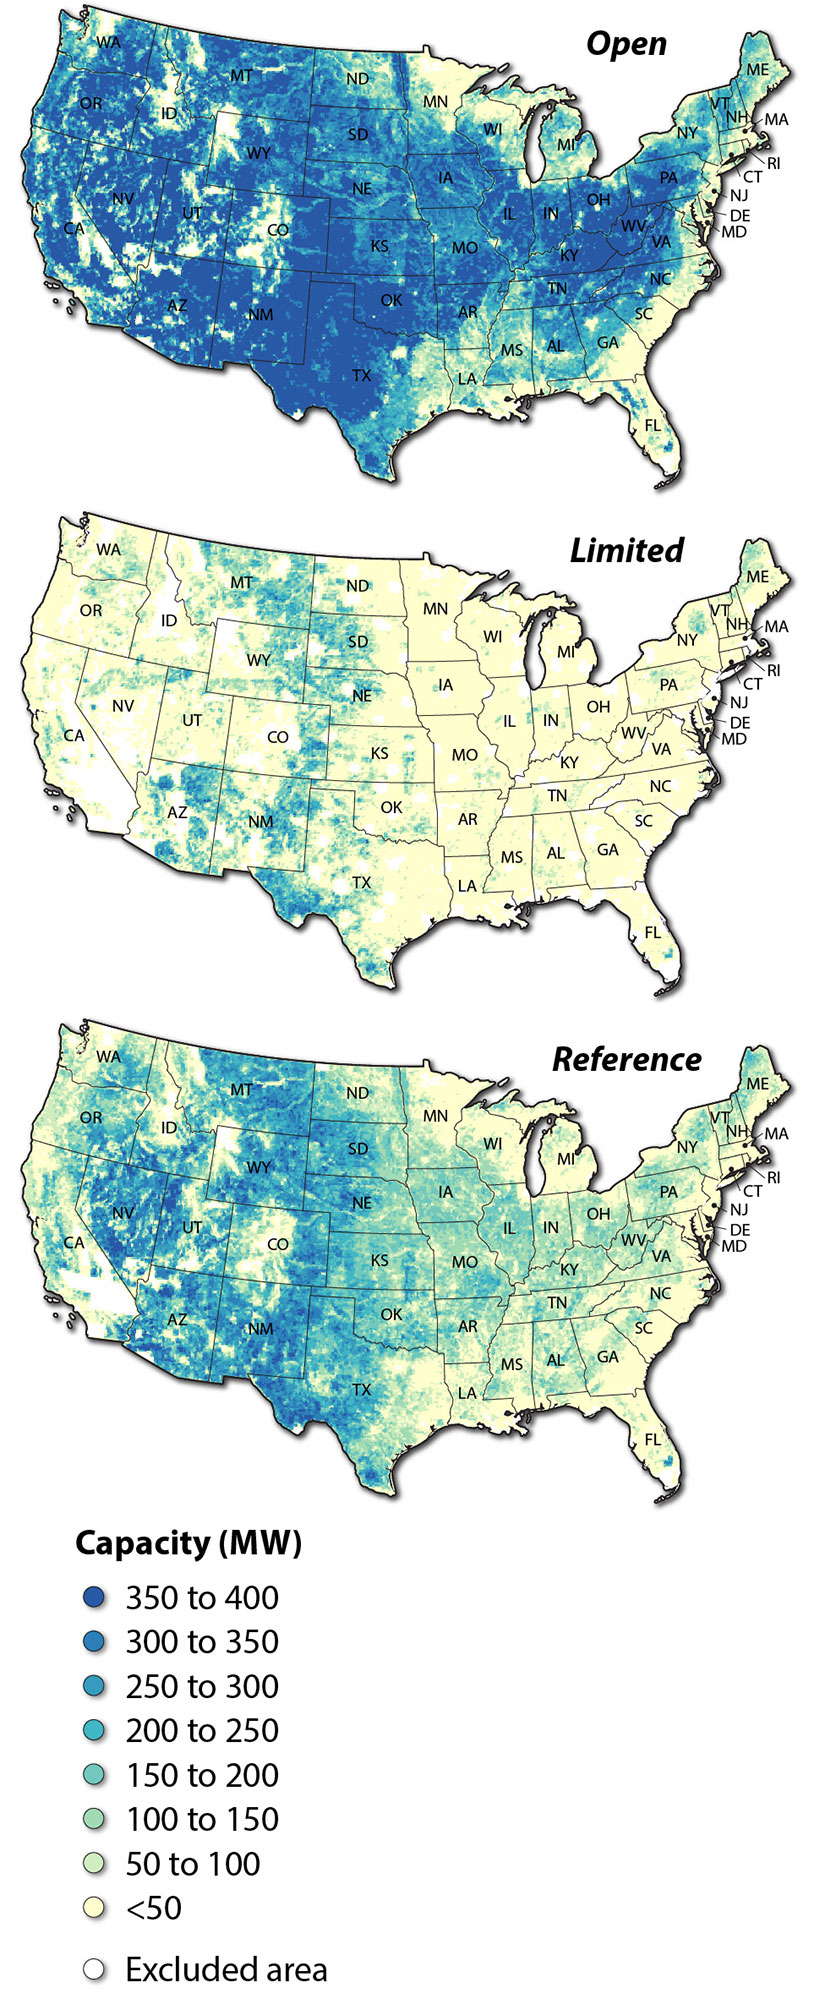 Three maps of the United States showing different levels of U.S. wind capacity based on the siting restriction scenarios, including open access, reference, and limited access. In the open access scenario, most of the country is blue, or 350 to 400 megawatts of capacity. In the reference scenario, most of the central part of the country is 150 to 200 megawatts of capacity. In the limited access scenario, or the one with the strictest siting restrictions, only a small strip in the least-populated part of the country from Texas up to Montana has 100 to 150 megawatts of capacity. The rest has less than 50, showing how wind siting have a measurable impact on wind energy potential and deployment.